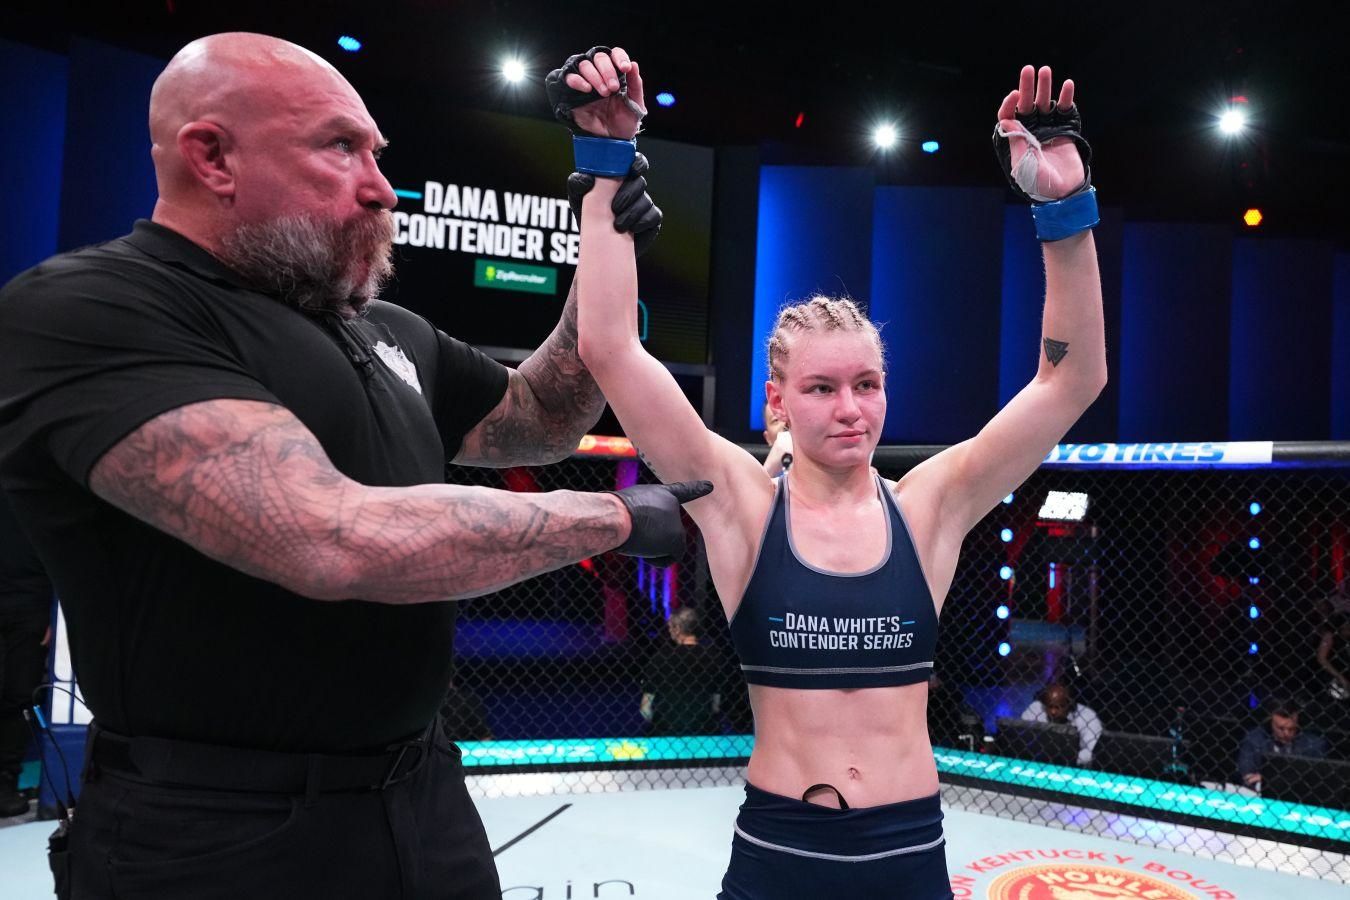 "I came to the gym even when my jaw was broken." An interview with a new UFC fighter Victoria Dudakova